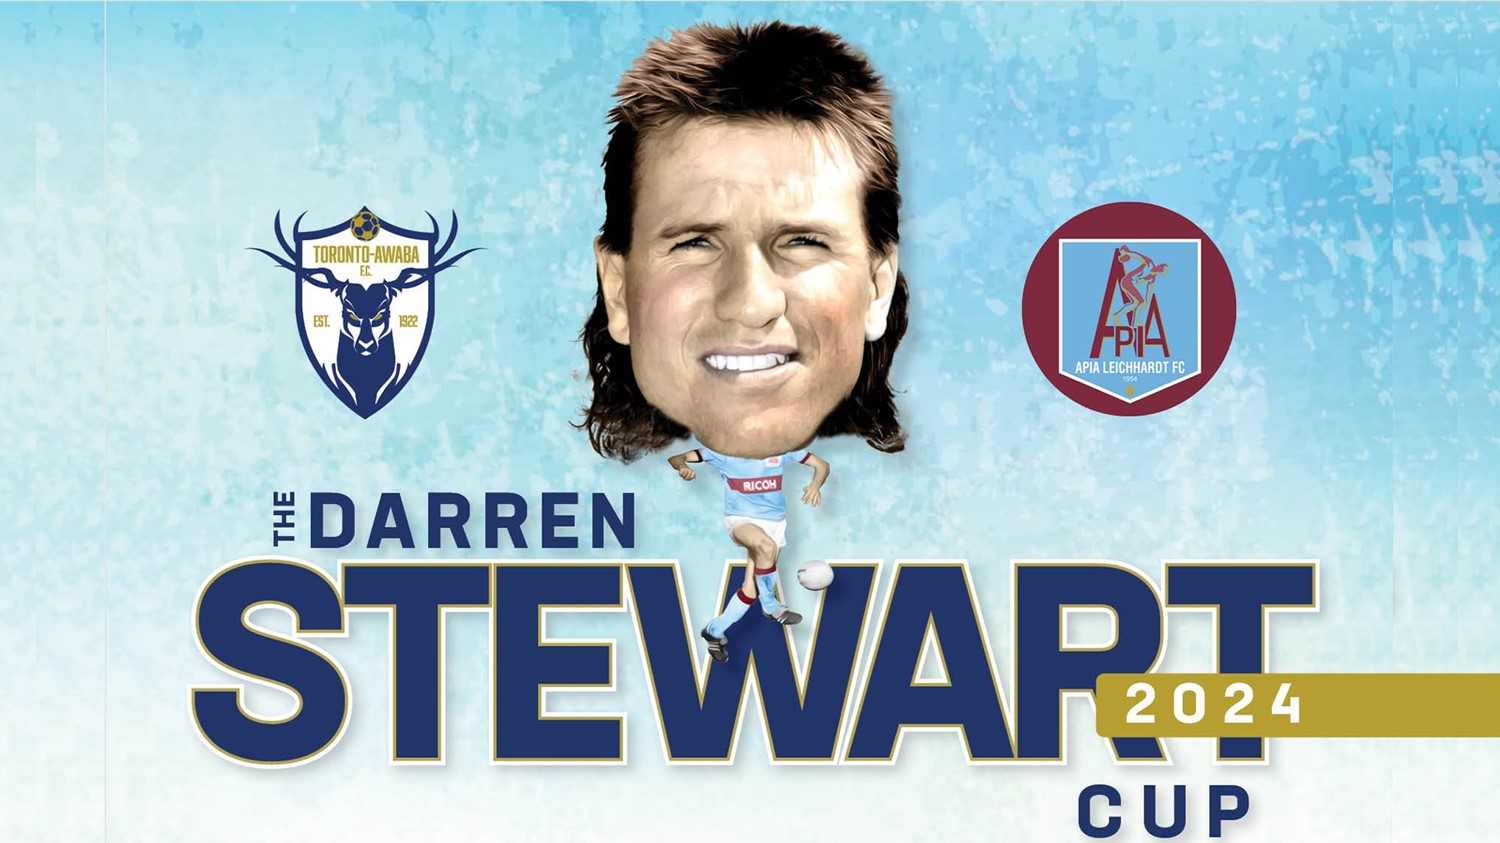 240210-Charity Football Darren Stewart Cup - Stags Firsts v APIA 20's - Toronto Awaba FC v APIA Leichhardt Minigame Slate Image